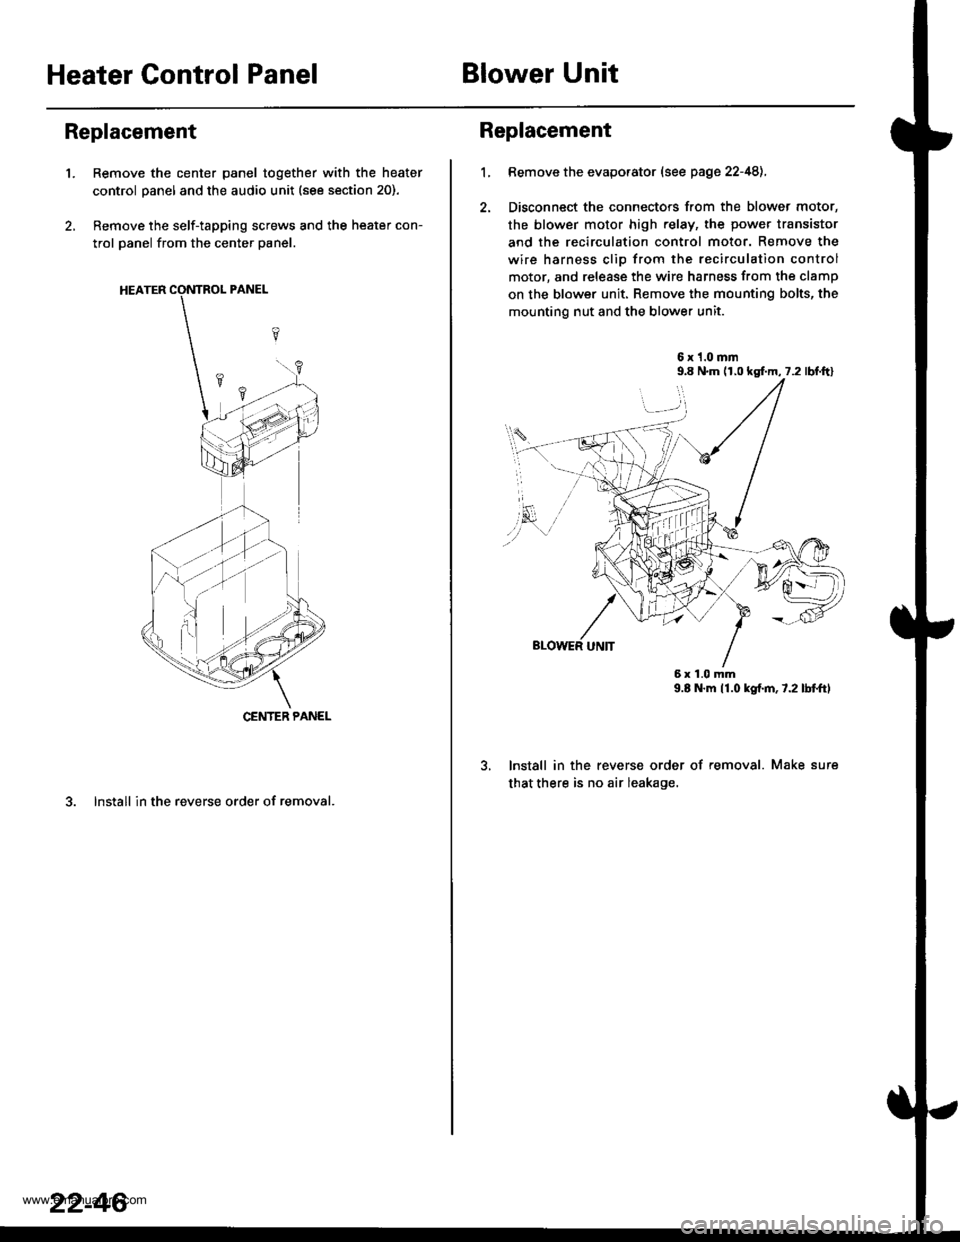 HONDA CR-V 1998 RD1-RD3 / 1.G Workshop Manual 
Heater Control PanelBlower Unit
Replacement
1.Remove the center panel together with the heater
control panel and the audio unit (see section 20).
Remove the self-tapping screws and the heater con-
t